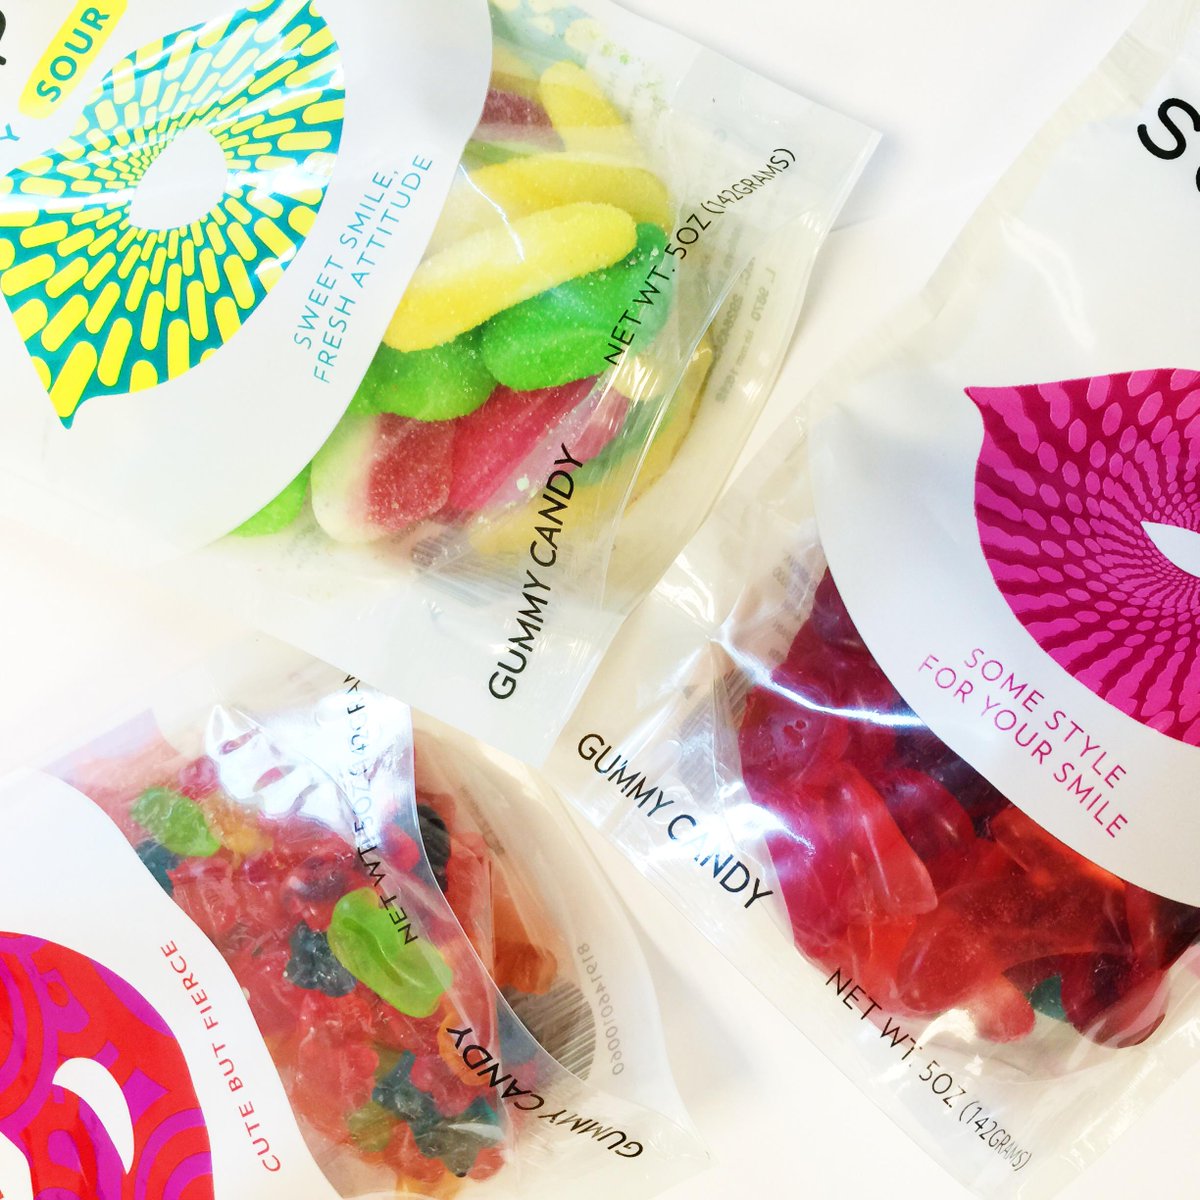 RT @Sugarpova: It's the last day to mix & match your favorite #Sugarpova sweets! Buy 2 bags & get 1 FREE! http://t.co/1yOcCzXkhN http://t.c…